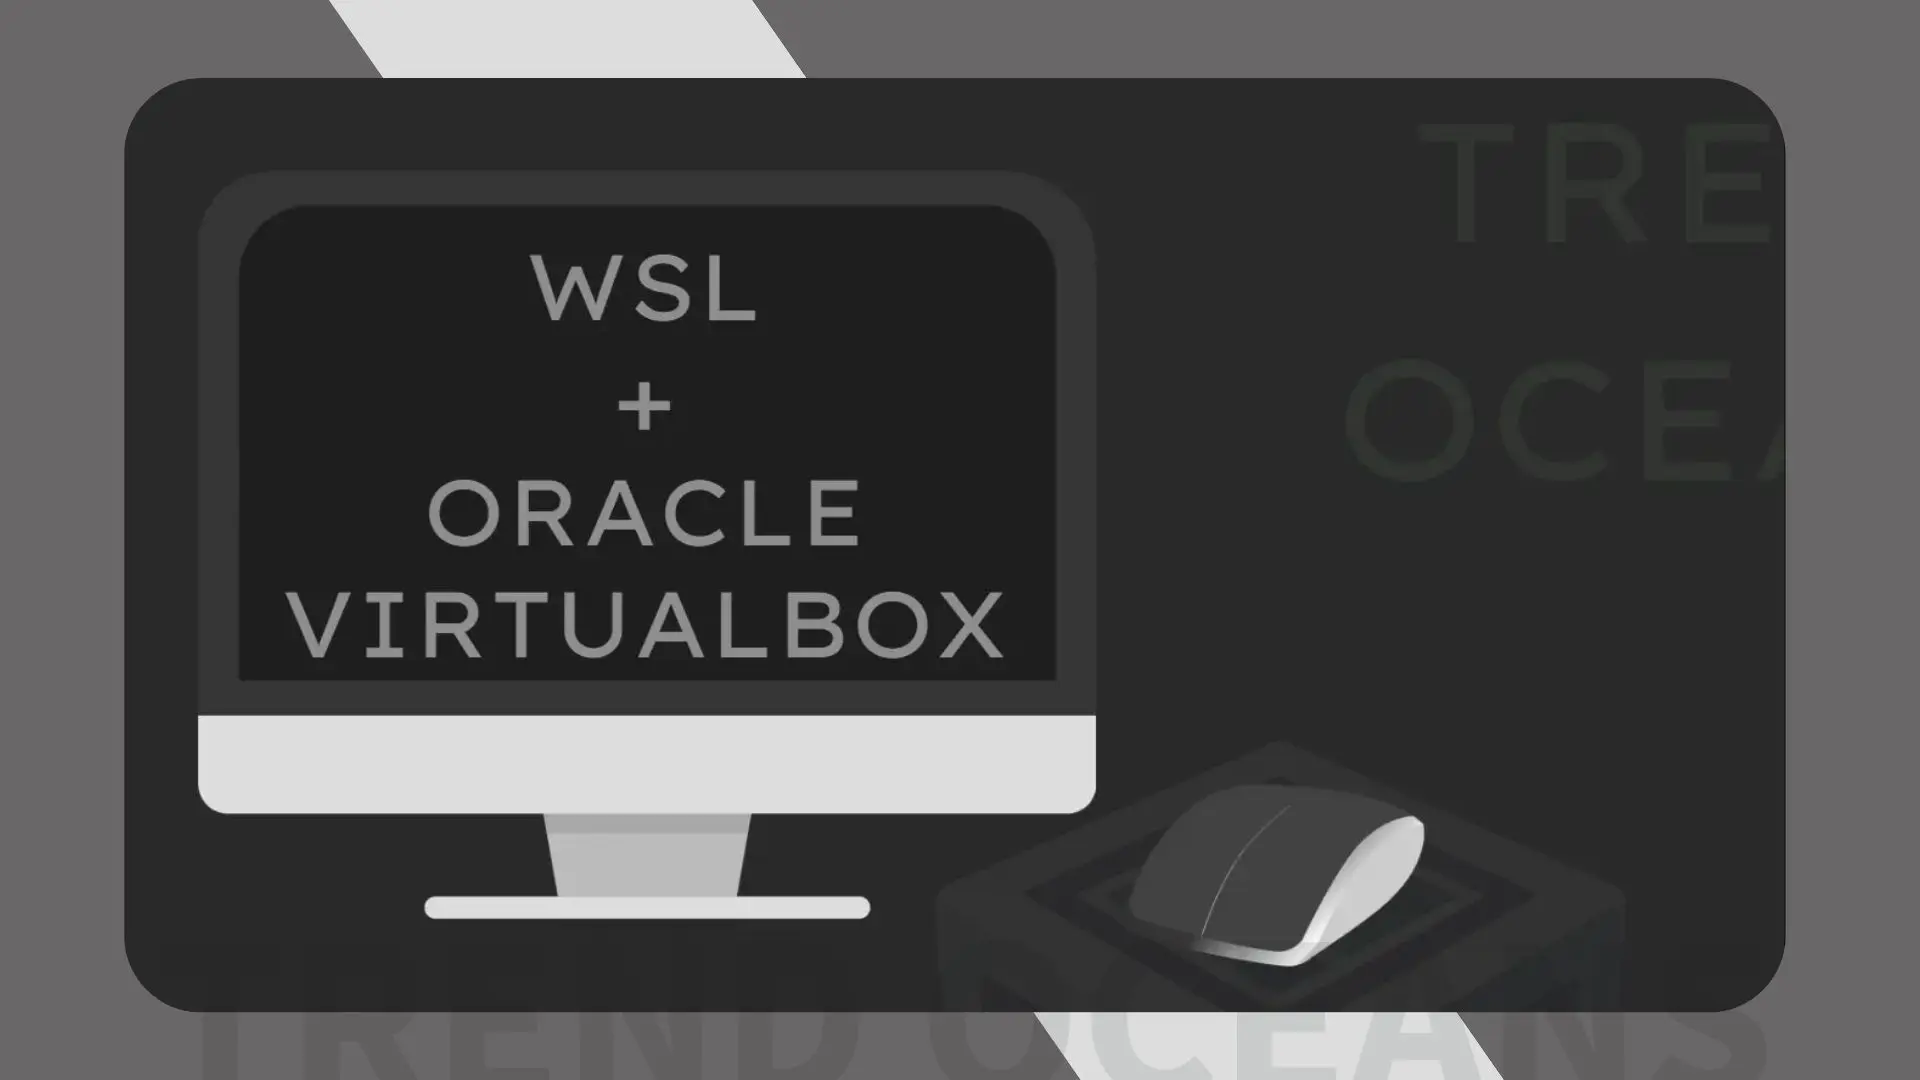 Use WSL and Oracle Virtualbox at the same time